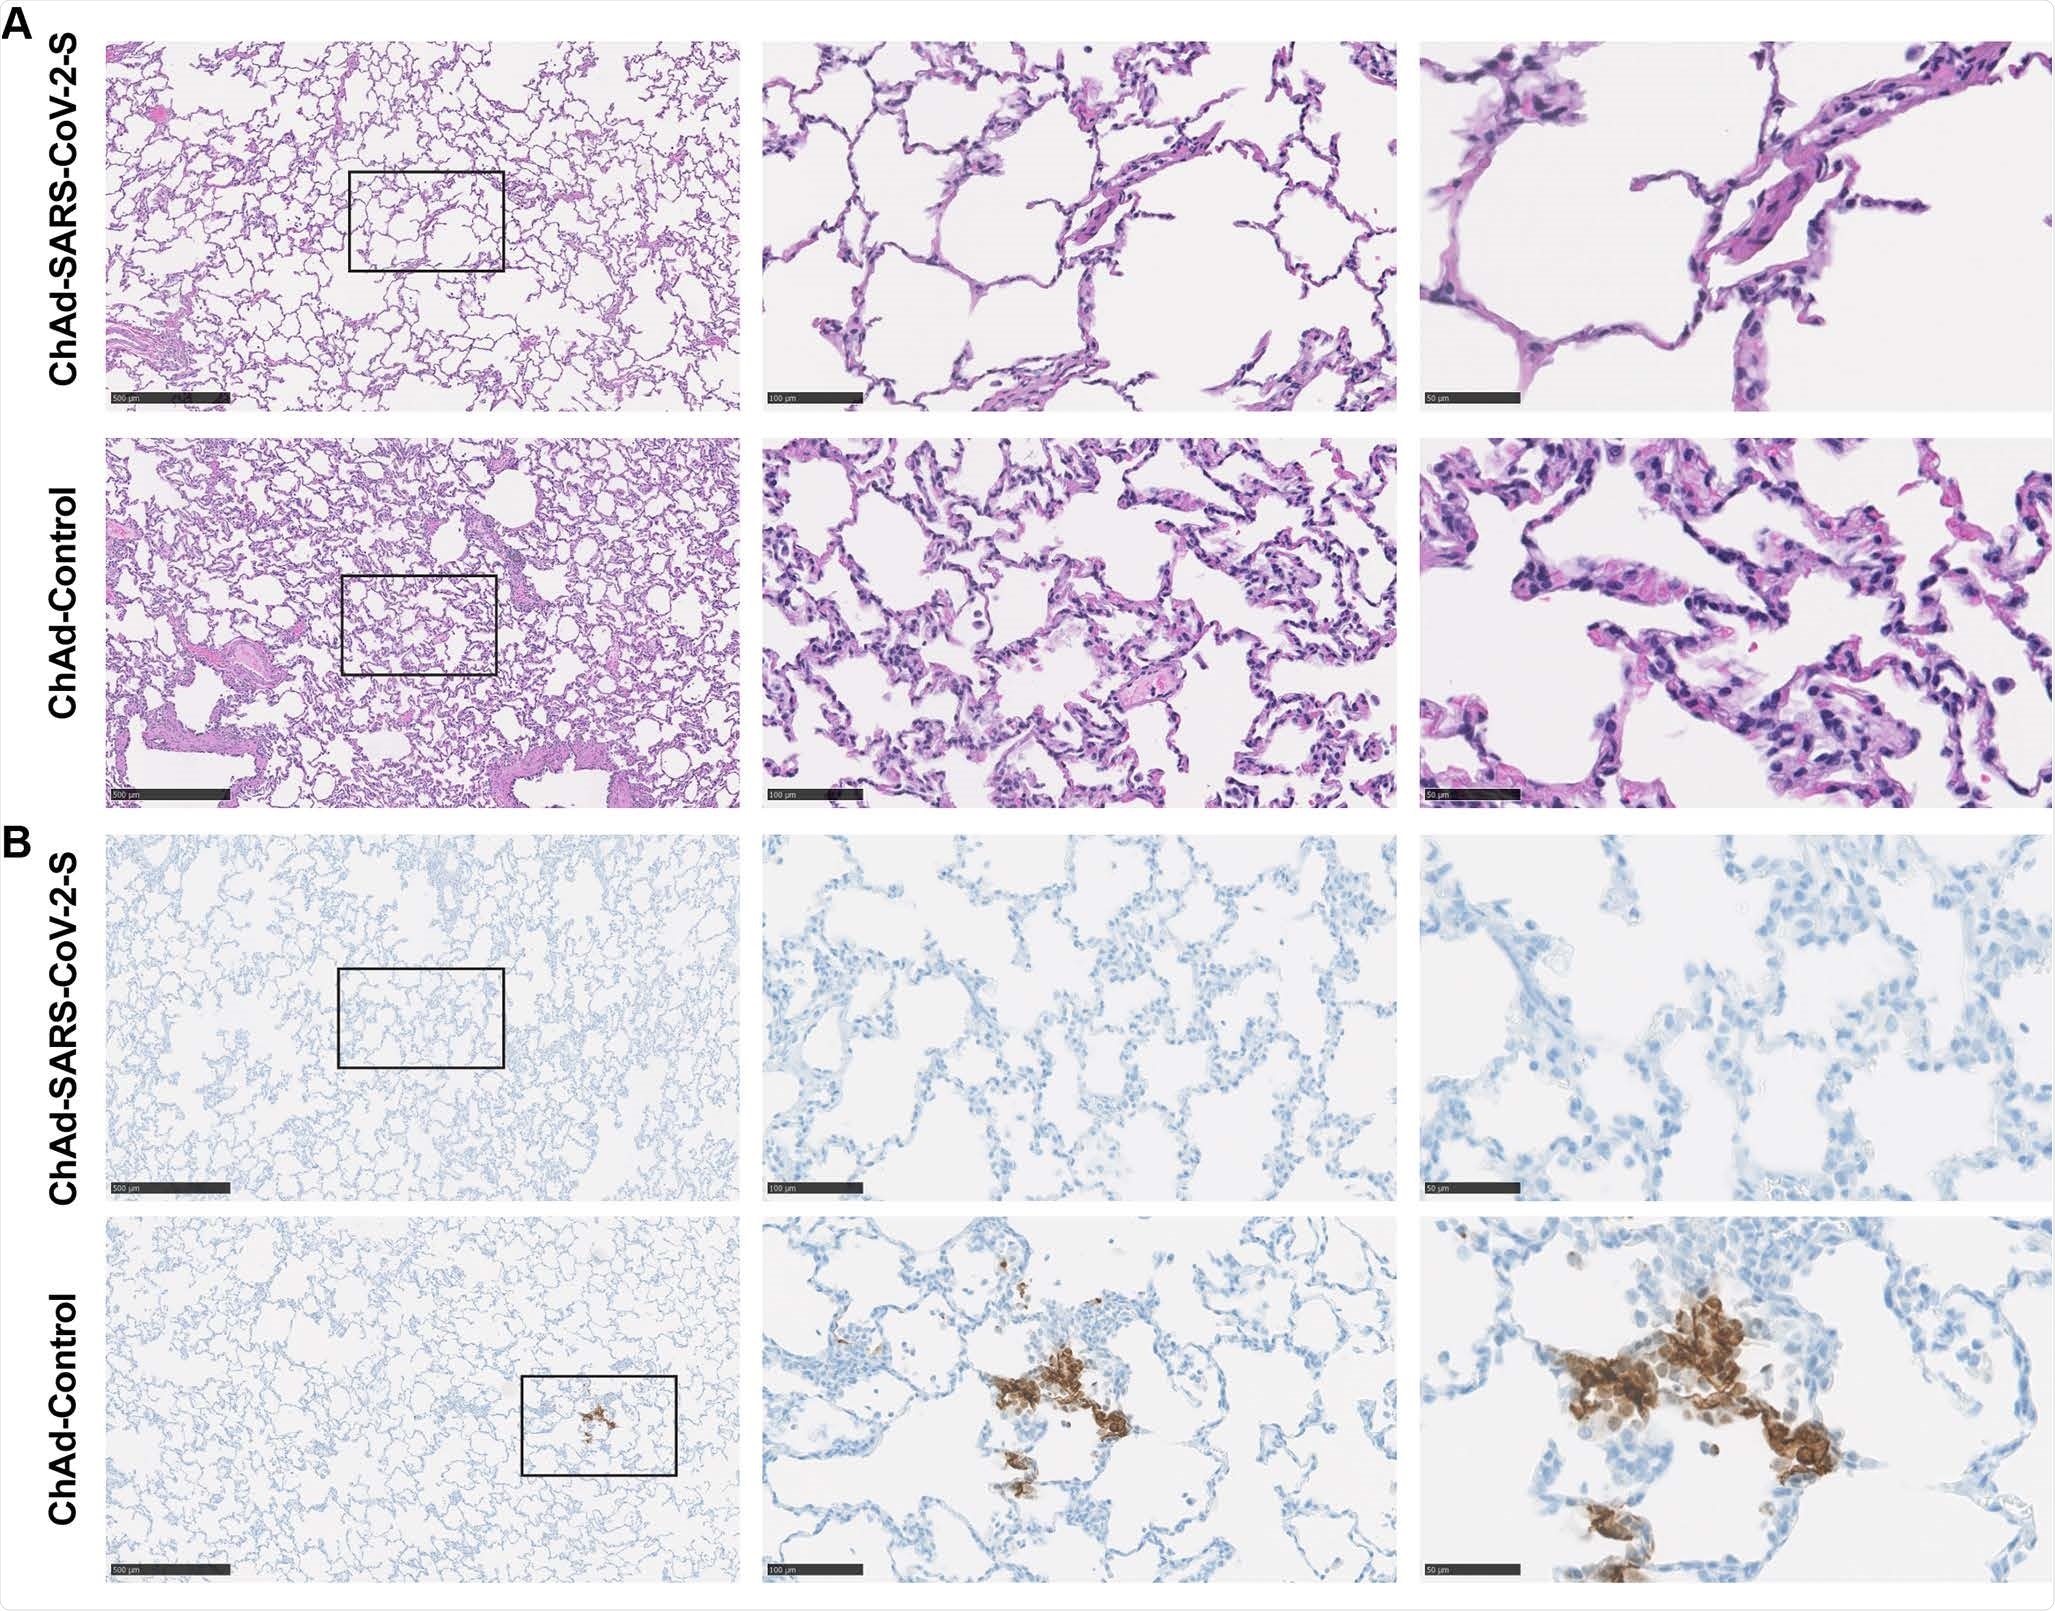 Pathological analysis of lungs of vaccinated RMs. RMs were immunized with ChAd-control and ChAd-SARS-CoV-2-S and challenged. Lungs were harvested at 7 dpi. A. Sections were stained with hematoxylin and eosin and imaged. Each image is representative of a group of 6 RMs. B. SARS-CoV-2 antigen was detected in lung sections from RMs for conditions described in (A). Images show low- (left; scale bars, 500 μm), medium- (middle; scale bars, 100 μm), and high-power magnification (right; scale bars, 50 μm). Representative images from n = 6 RMs per group.